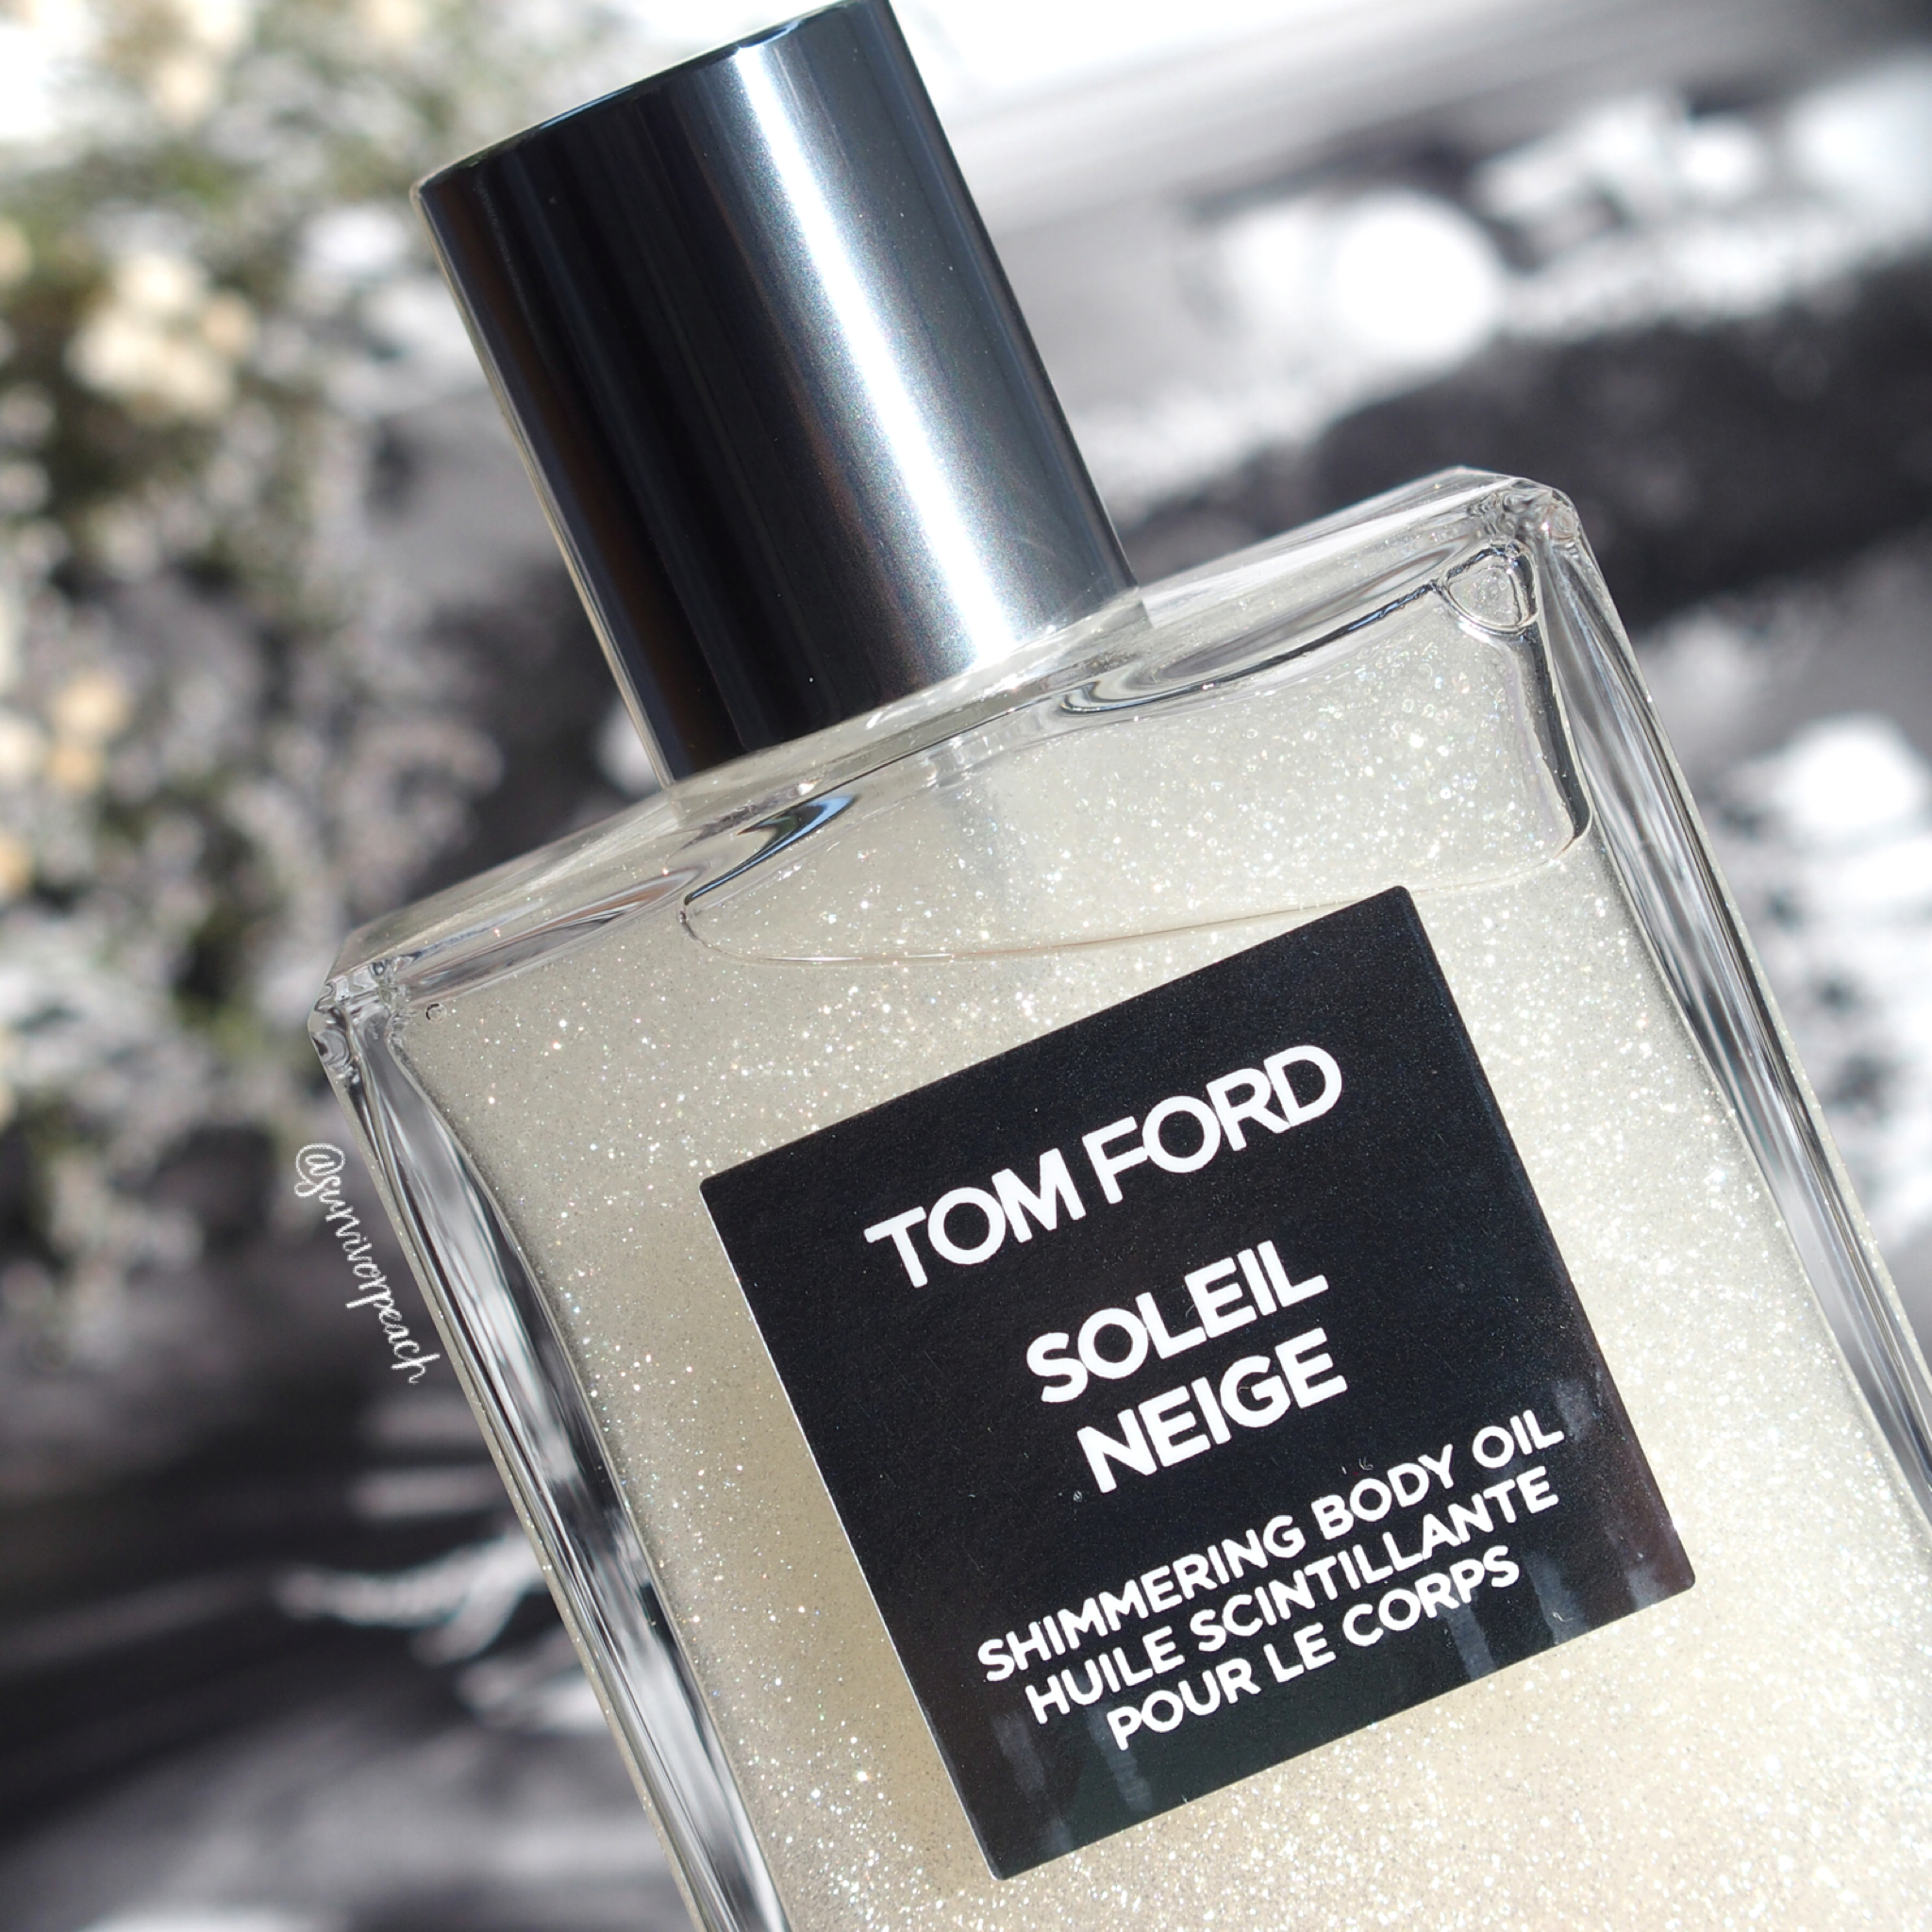 Tomford Soleil Neige Collection Review and swatches: Soleil Neige, Soleil  D'Hiver, Soleil Et Lune — Survivorpeach